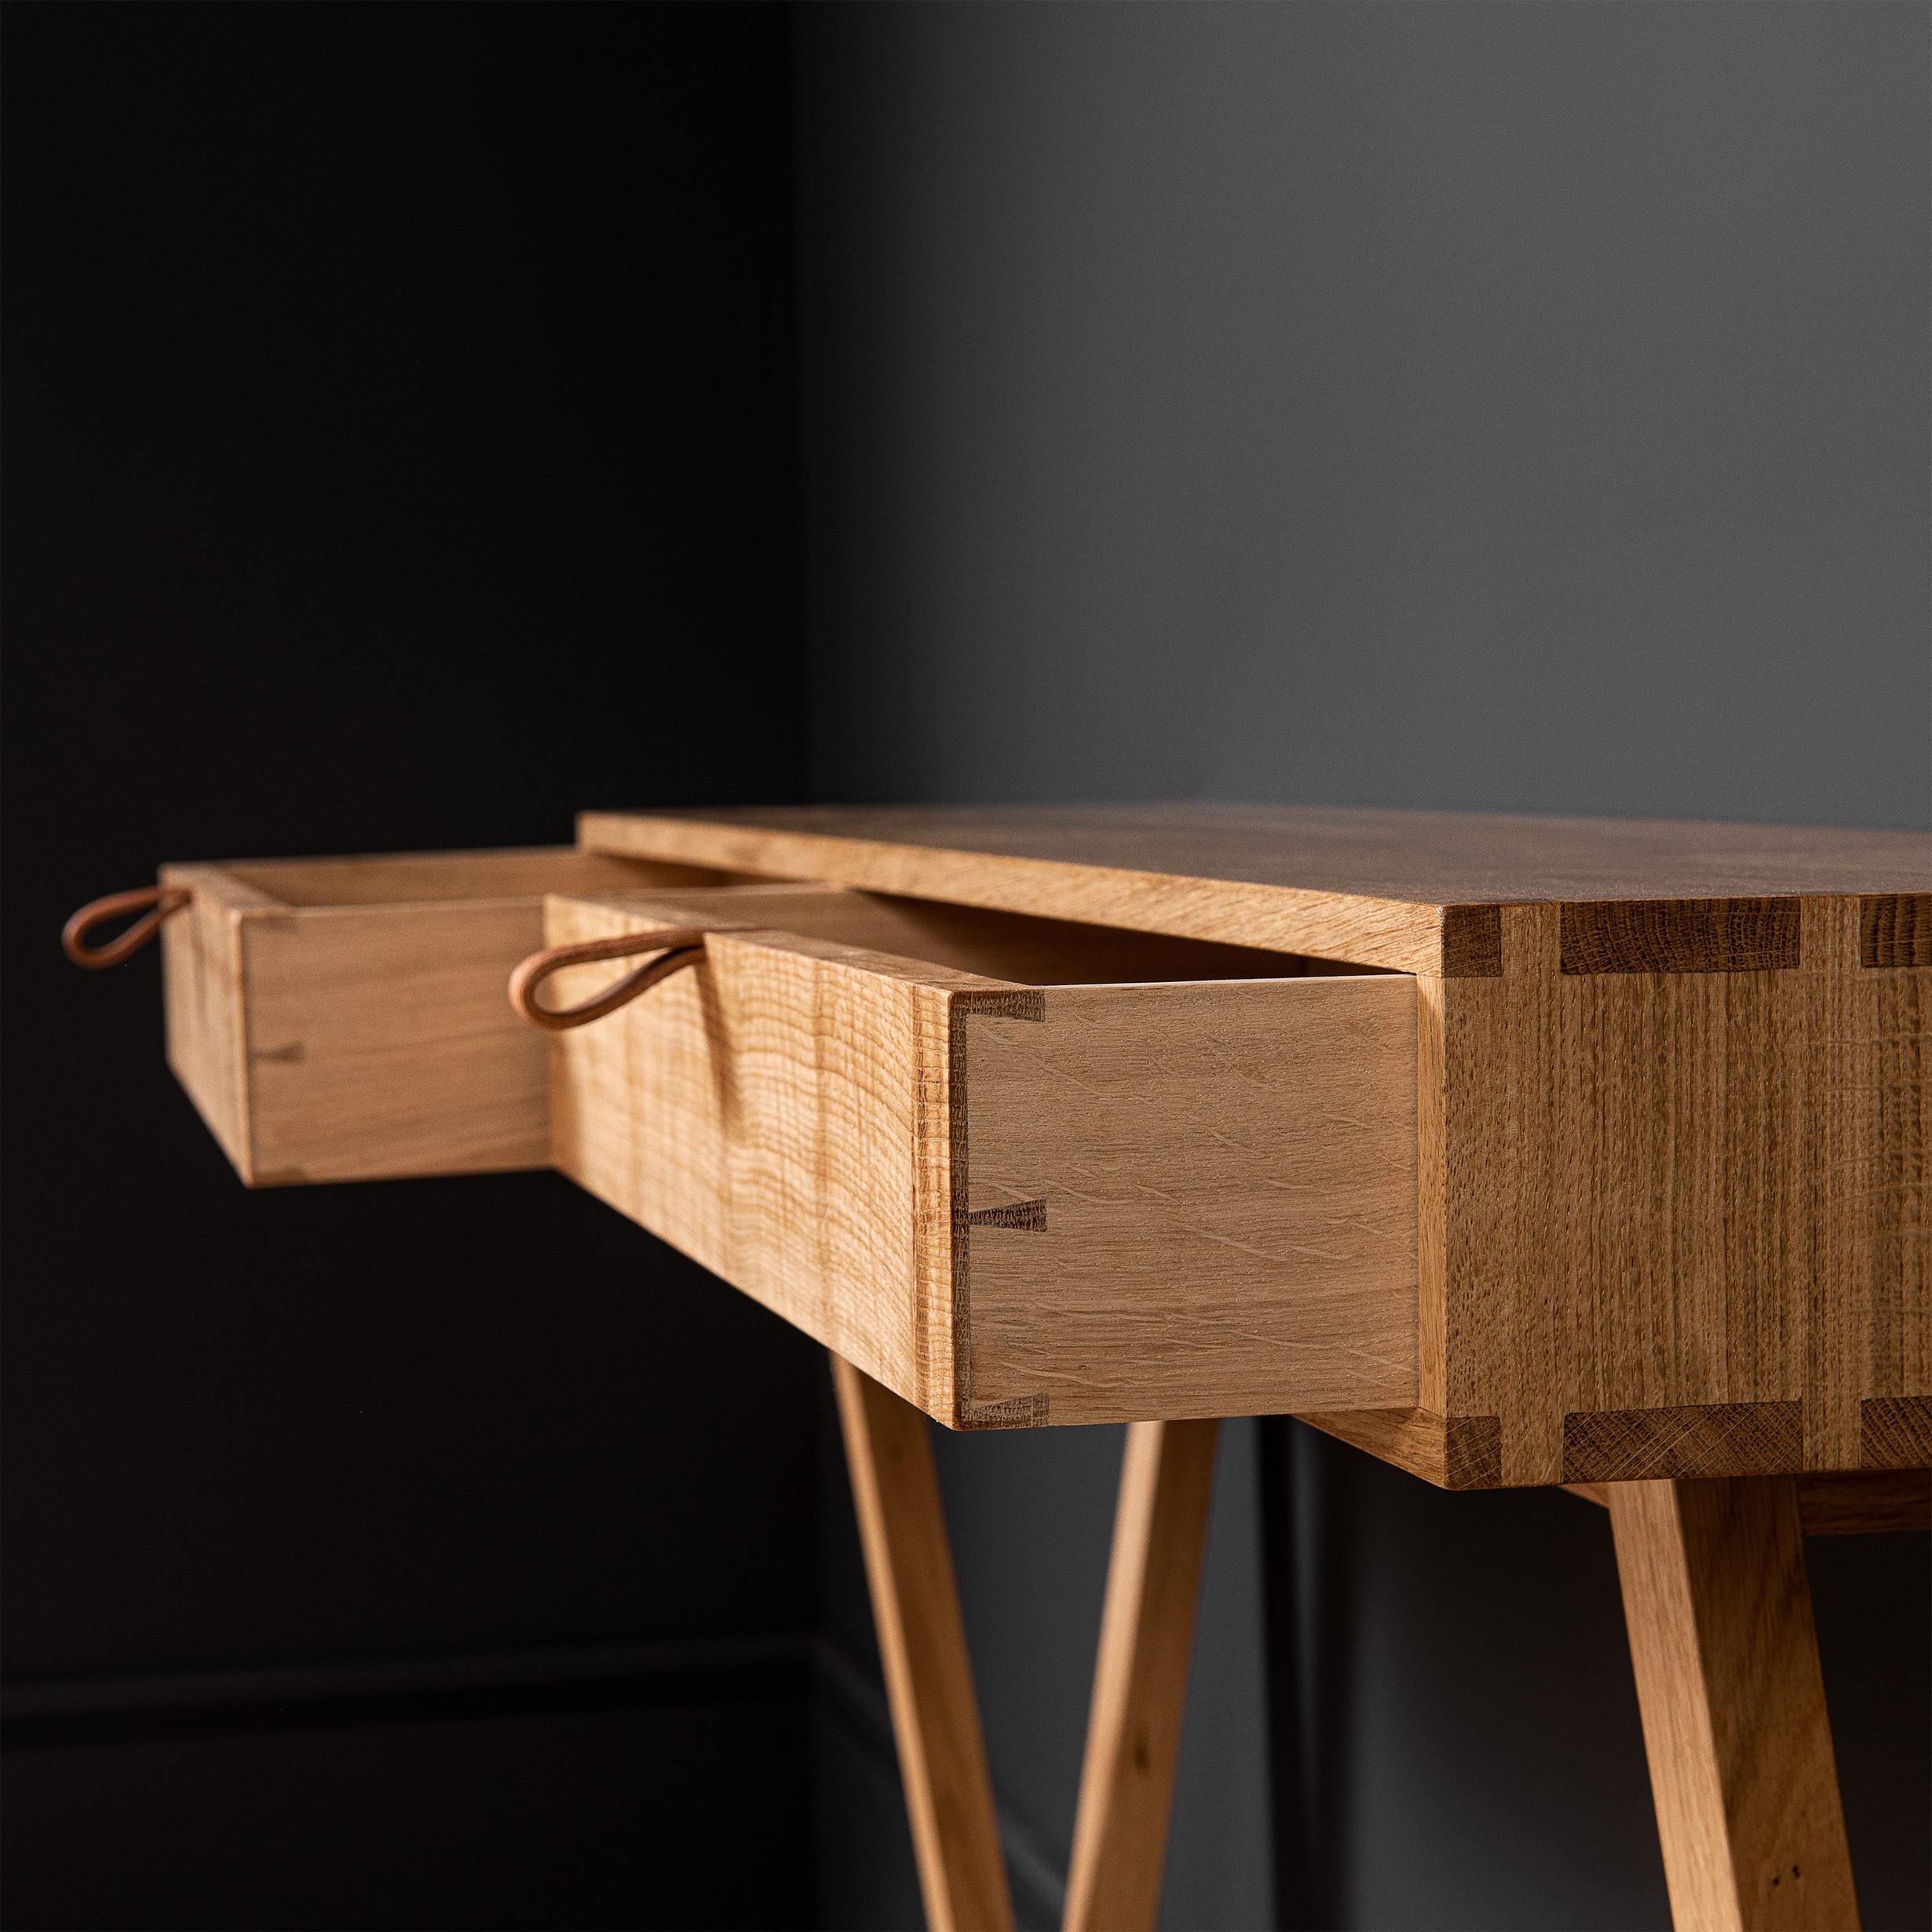 Modernist oak console table designed and produced in England using traditional furniture making techniques. Completely handcrafted from the finest fully quarter-sawn English oak. Hand dovetailed joints to the main oak box and all inner drawer parts.